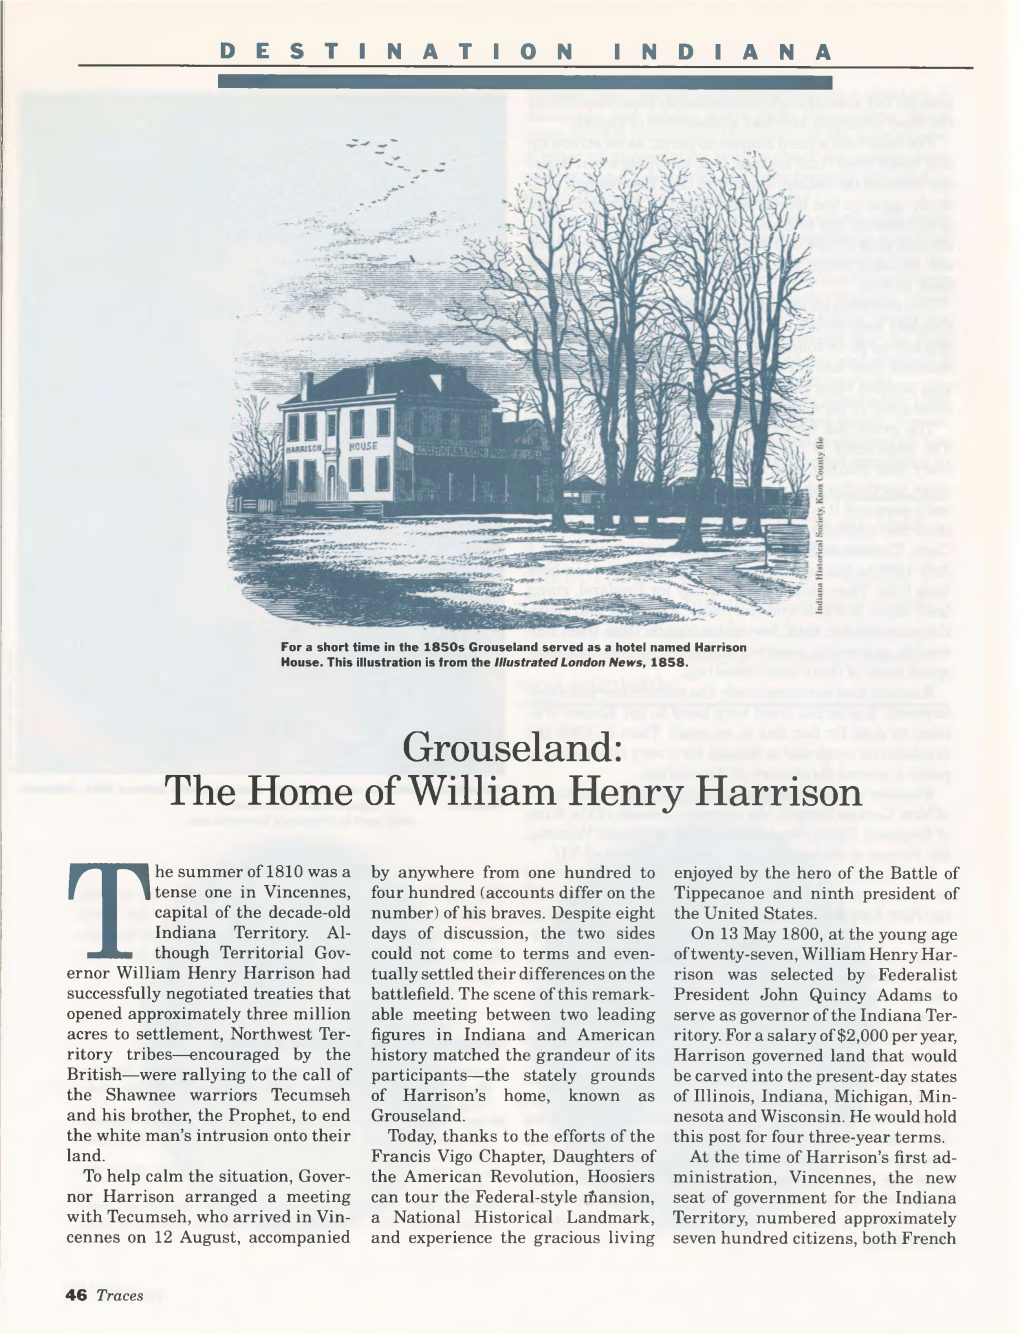 Grouseland: the Home of William Henry Harrison